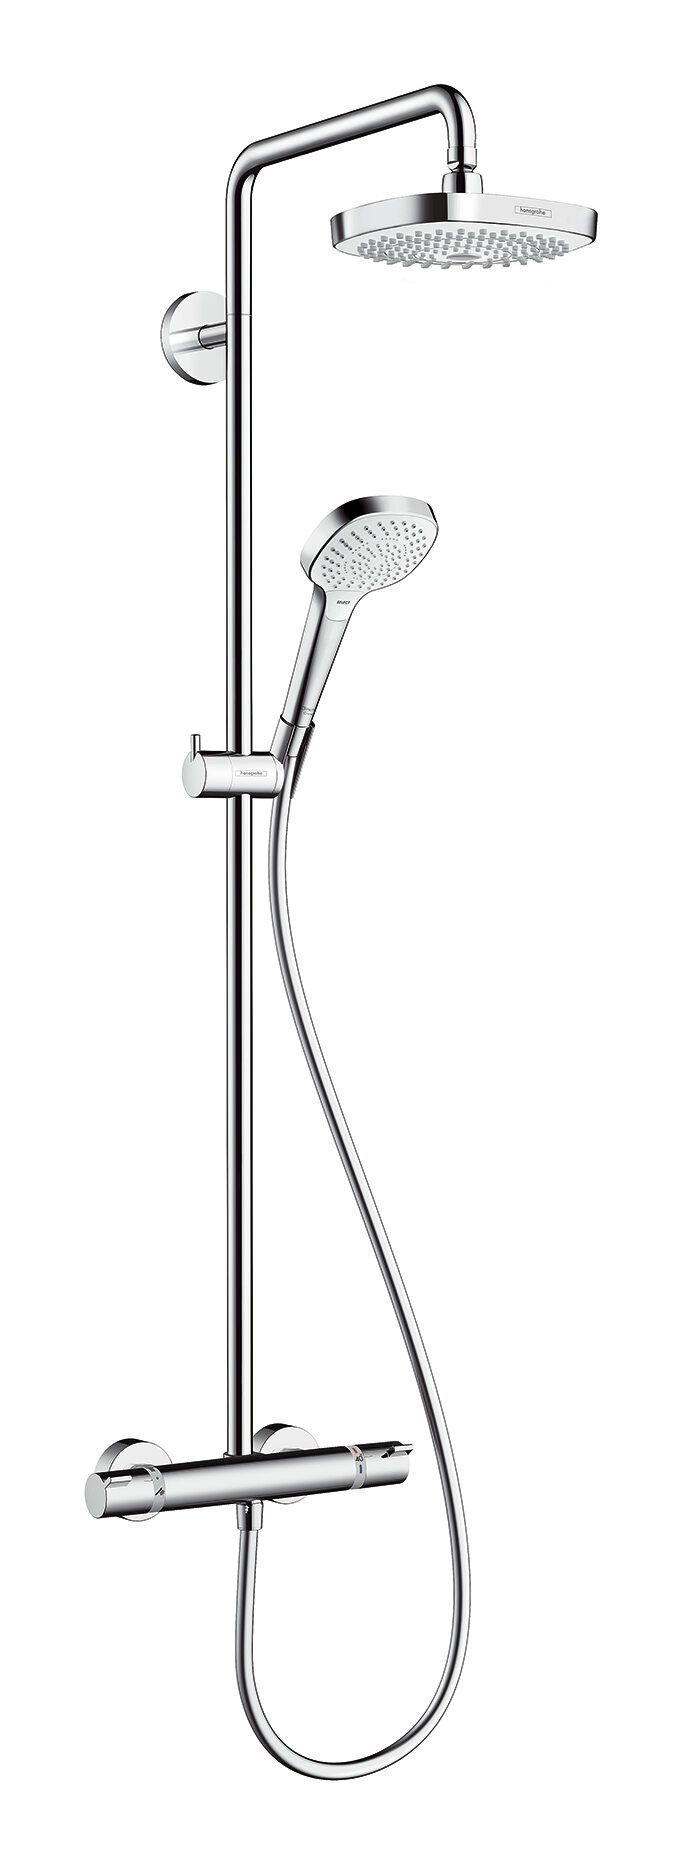 hansgrohe Duschsystem Croma Select E Showerpipe, Höhe 114.1 cm, 2 Strahlart(en), 180 2jet mit Thermostat Weiß / Chrom